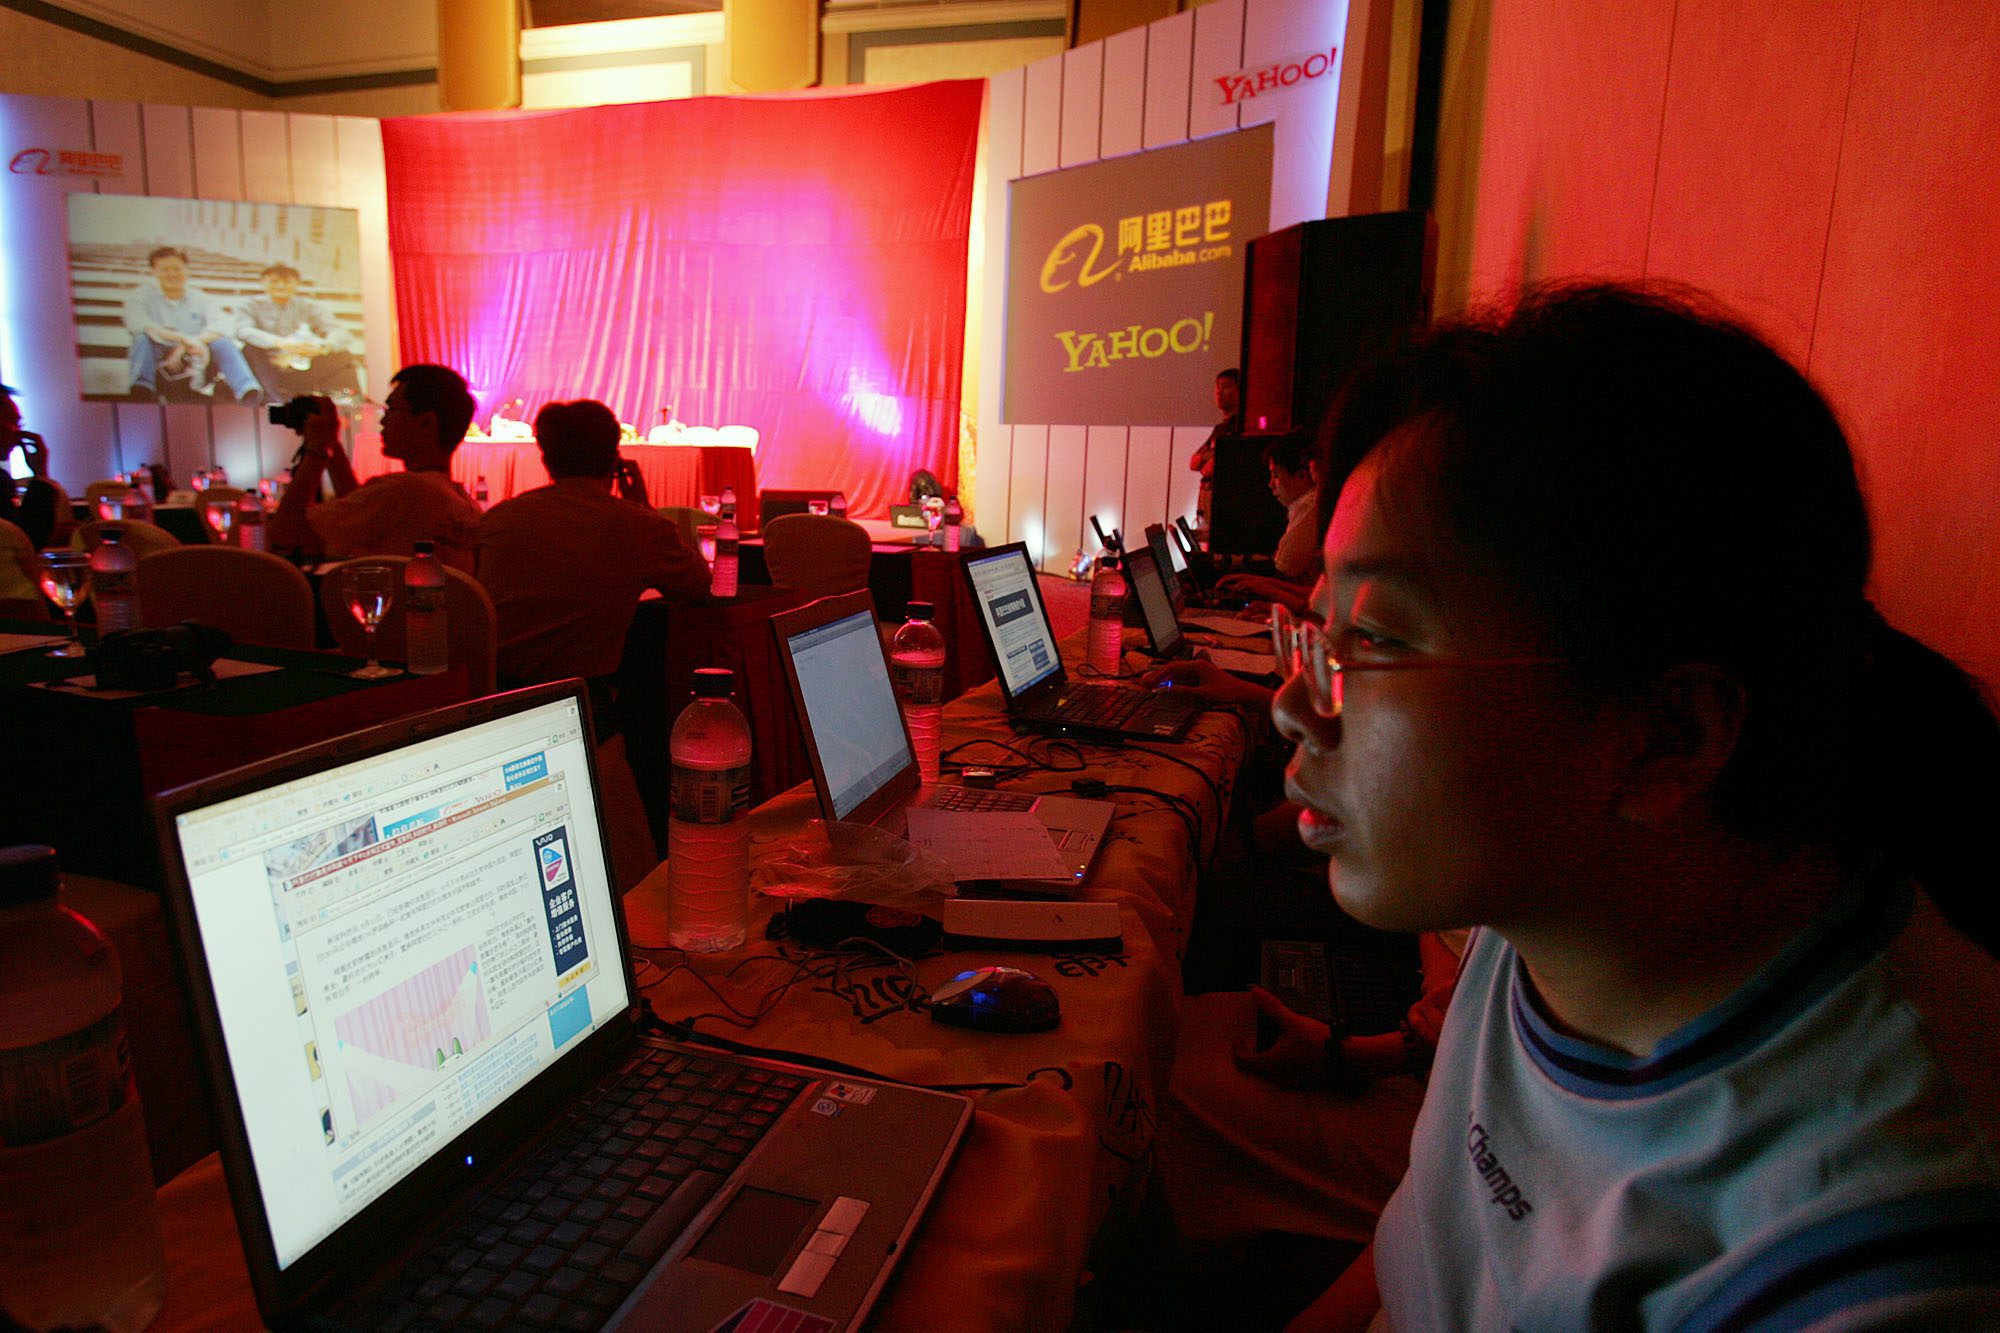 A Chinese woman uses a Yahoo browser moments before an Ali Baba and Yahoo joint press conference at the China World hotel in Beijing Thursday, Aug. 11, 2005. Yahoo Inc. announced Thursday it would pay US$1 billion (euro810 million) in cash to acquire a 40 percent stake in the Chinese e-commerce firm Alibaba.com. The agreement makes Yahoo the largest strategic investor in Alibaba, and is the biggest deal yet in a flurry of investments in China by foreign Internet companies eager for a share of a market with more than 100 million people online. (KEYSTONE/AP/Elizabeth Dalziel) CHINA YAHOO ALIBABA